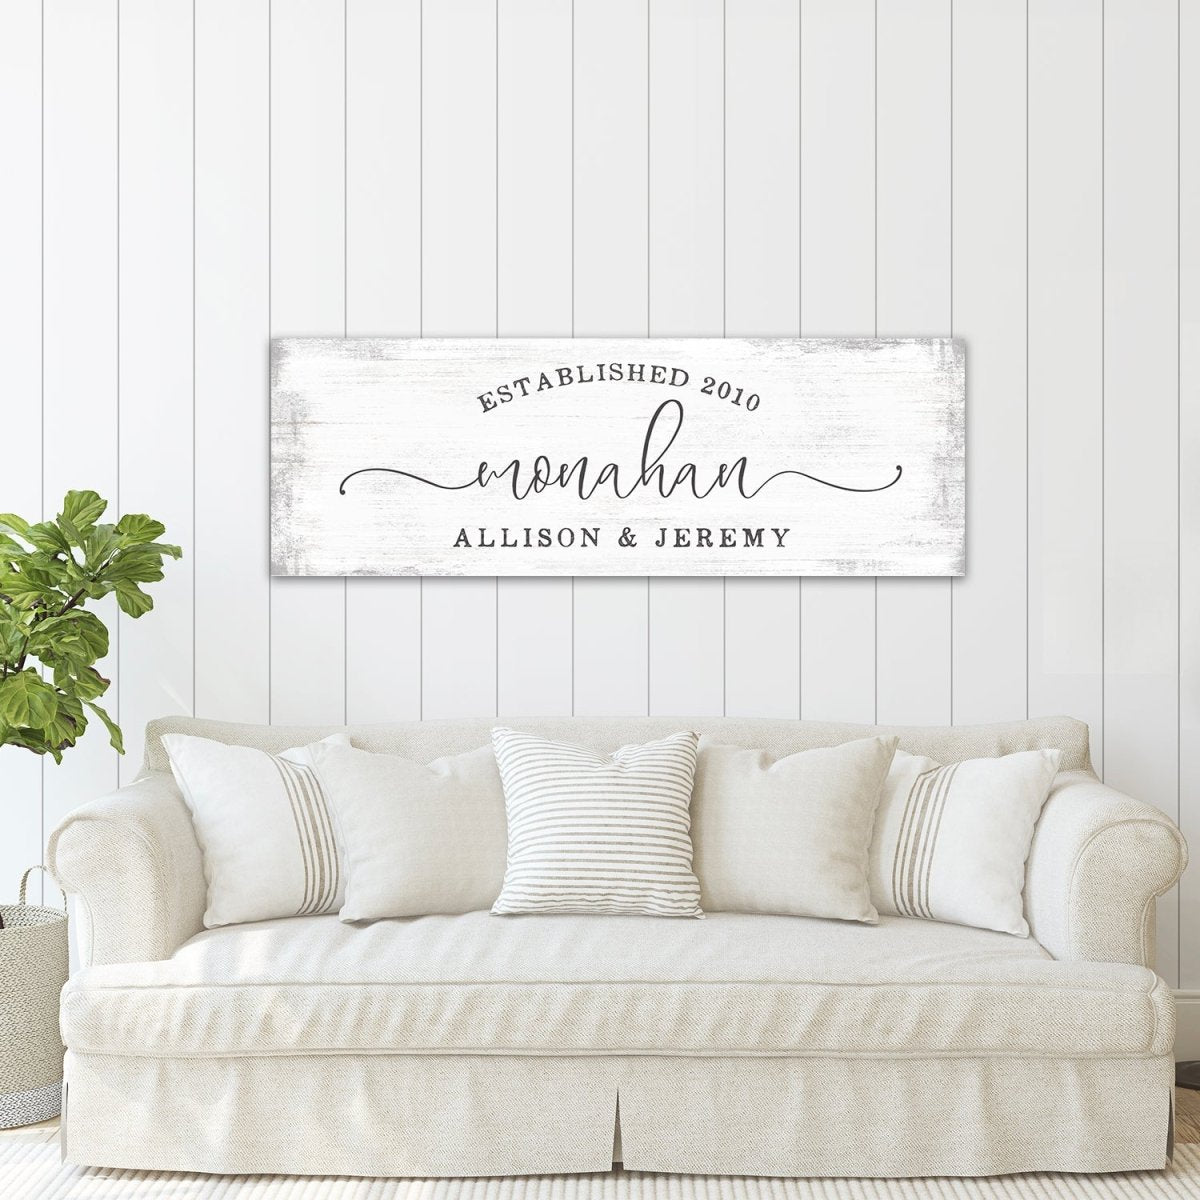 Newlywed Established Sign With Names Above Couch - Pretty Perfect Studio